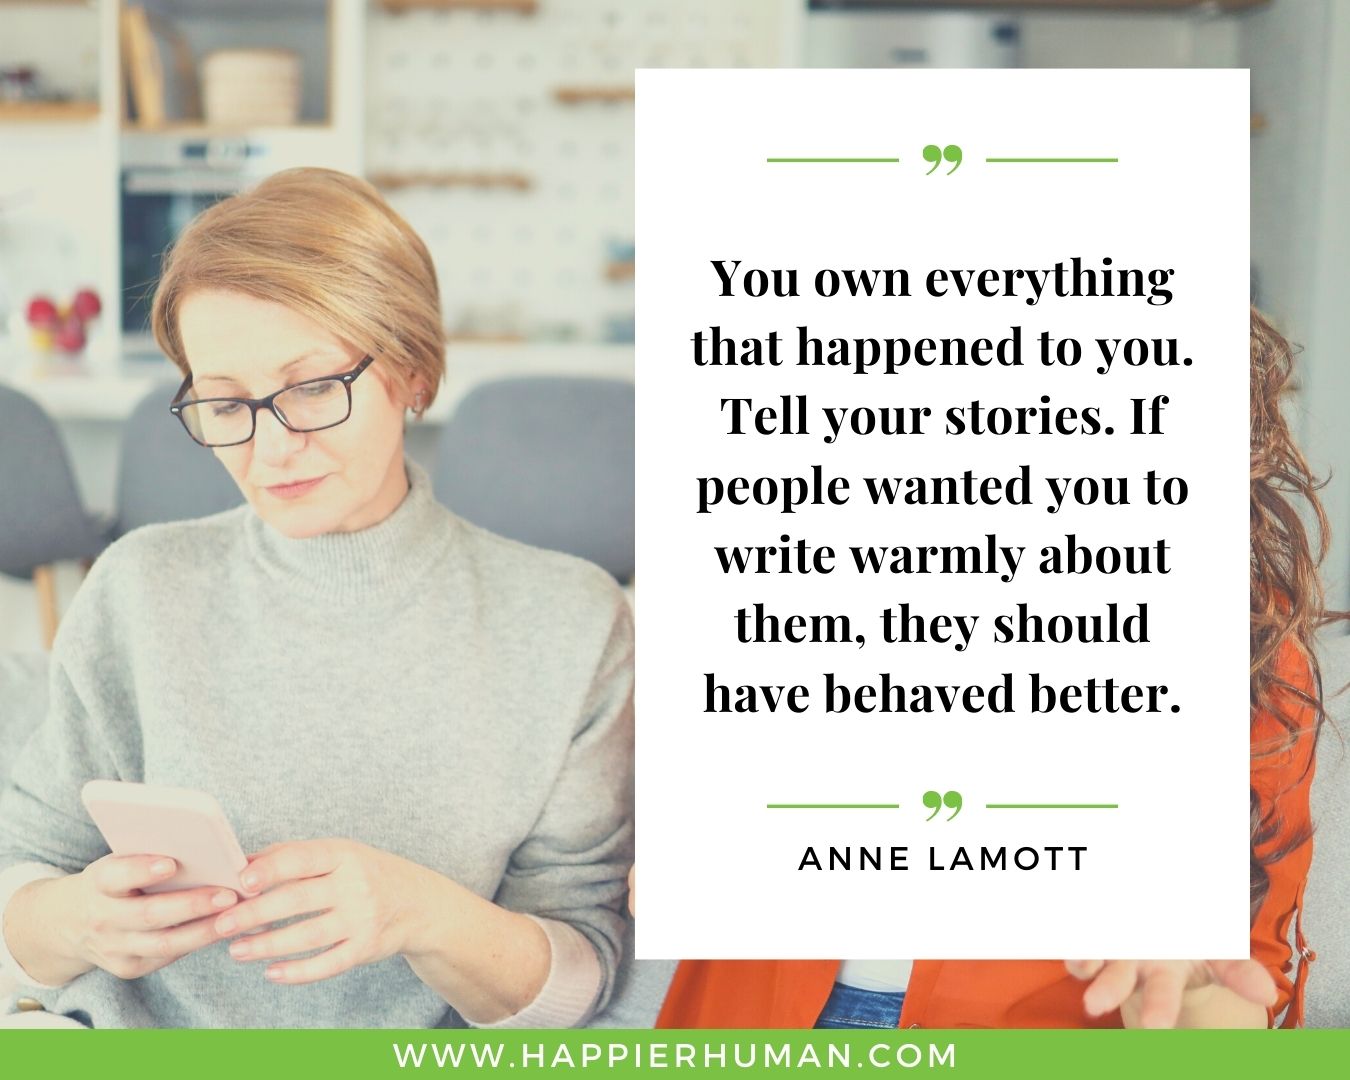 Toxic People Quotes - “You own everything that happened to you. Tell your stories. If people wanted you to write warmly about them, they should have behaved better.” – Anne Lamott